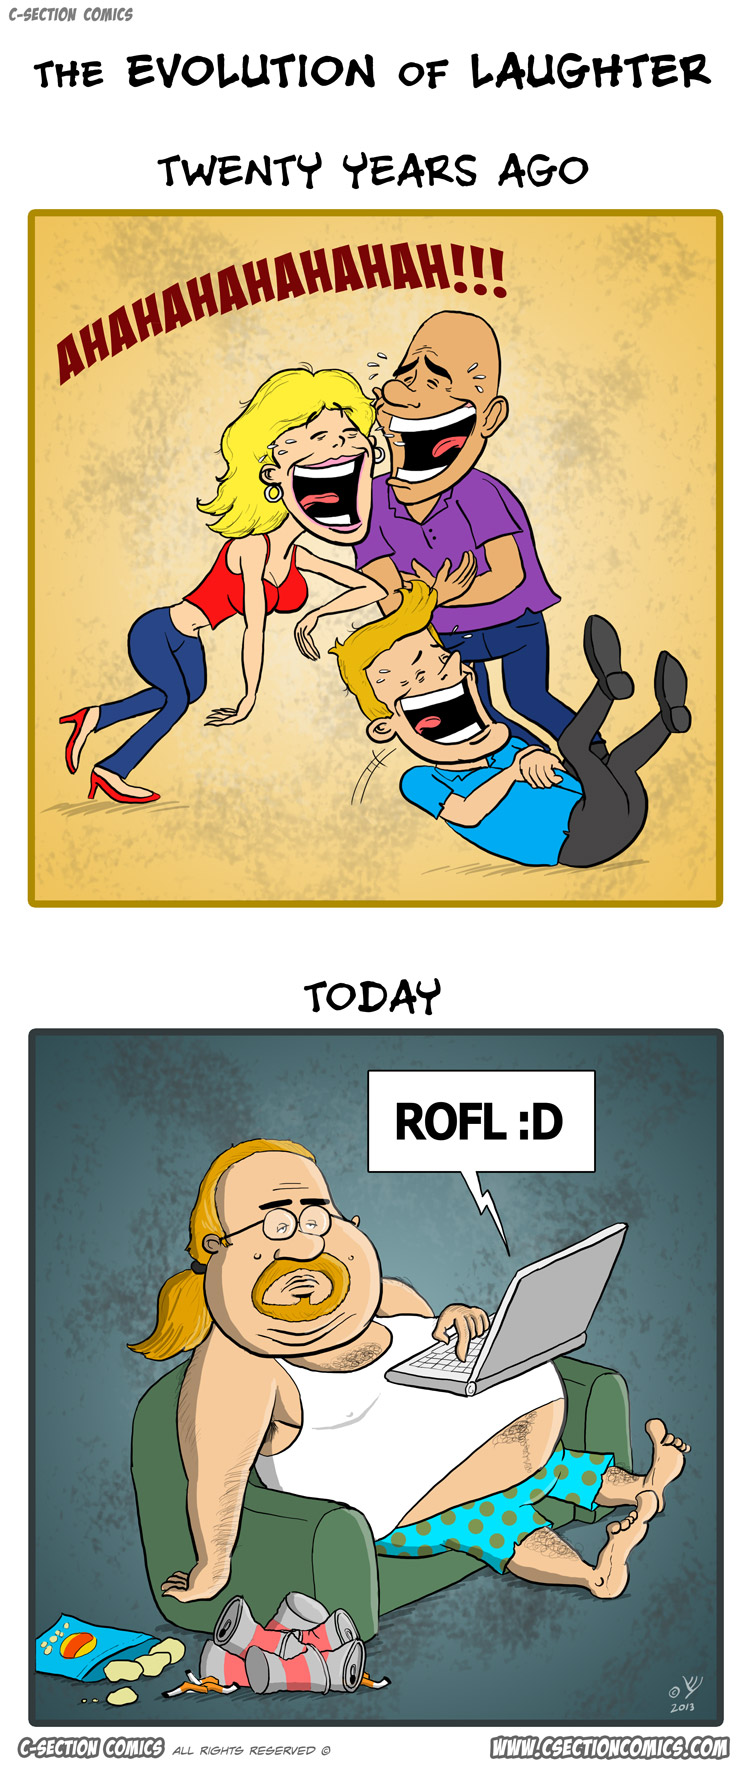 The Evolution of Laughter - A cartoon by C-Section Comics